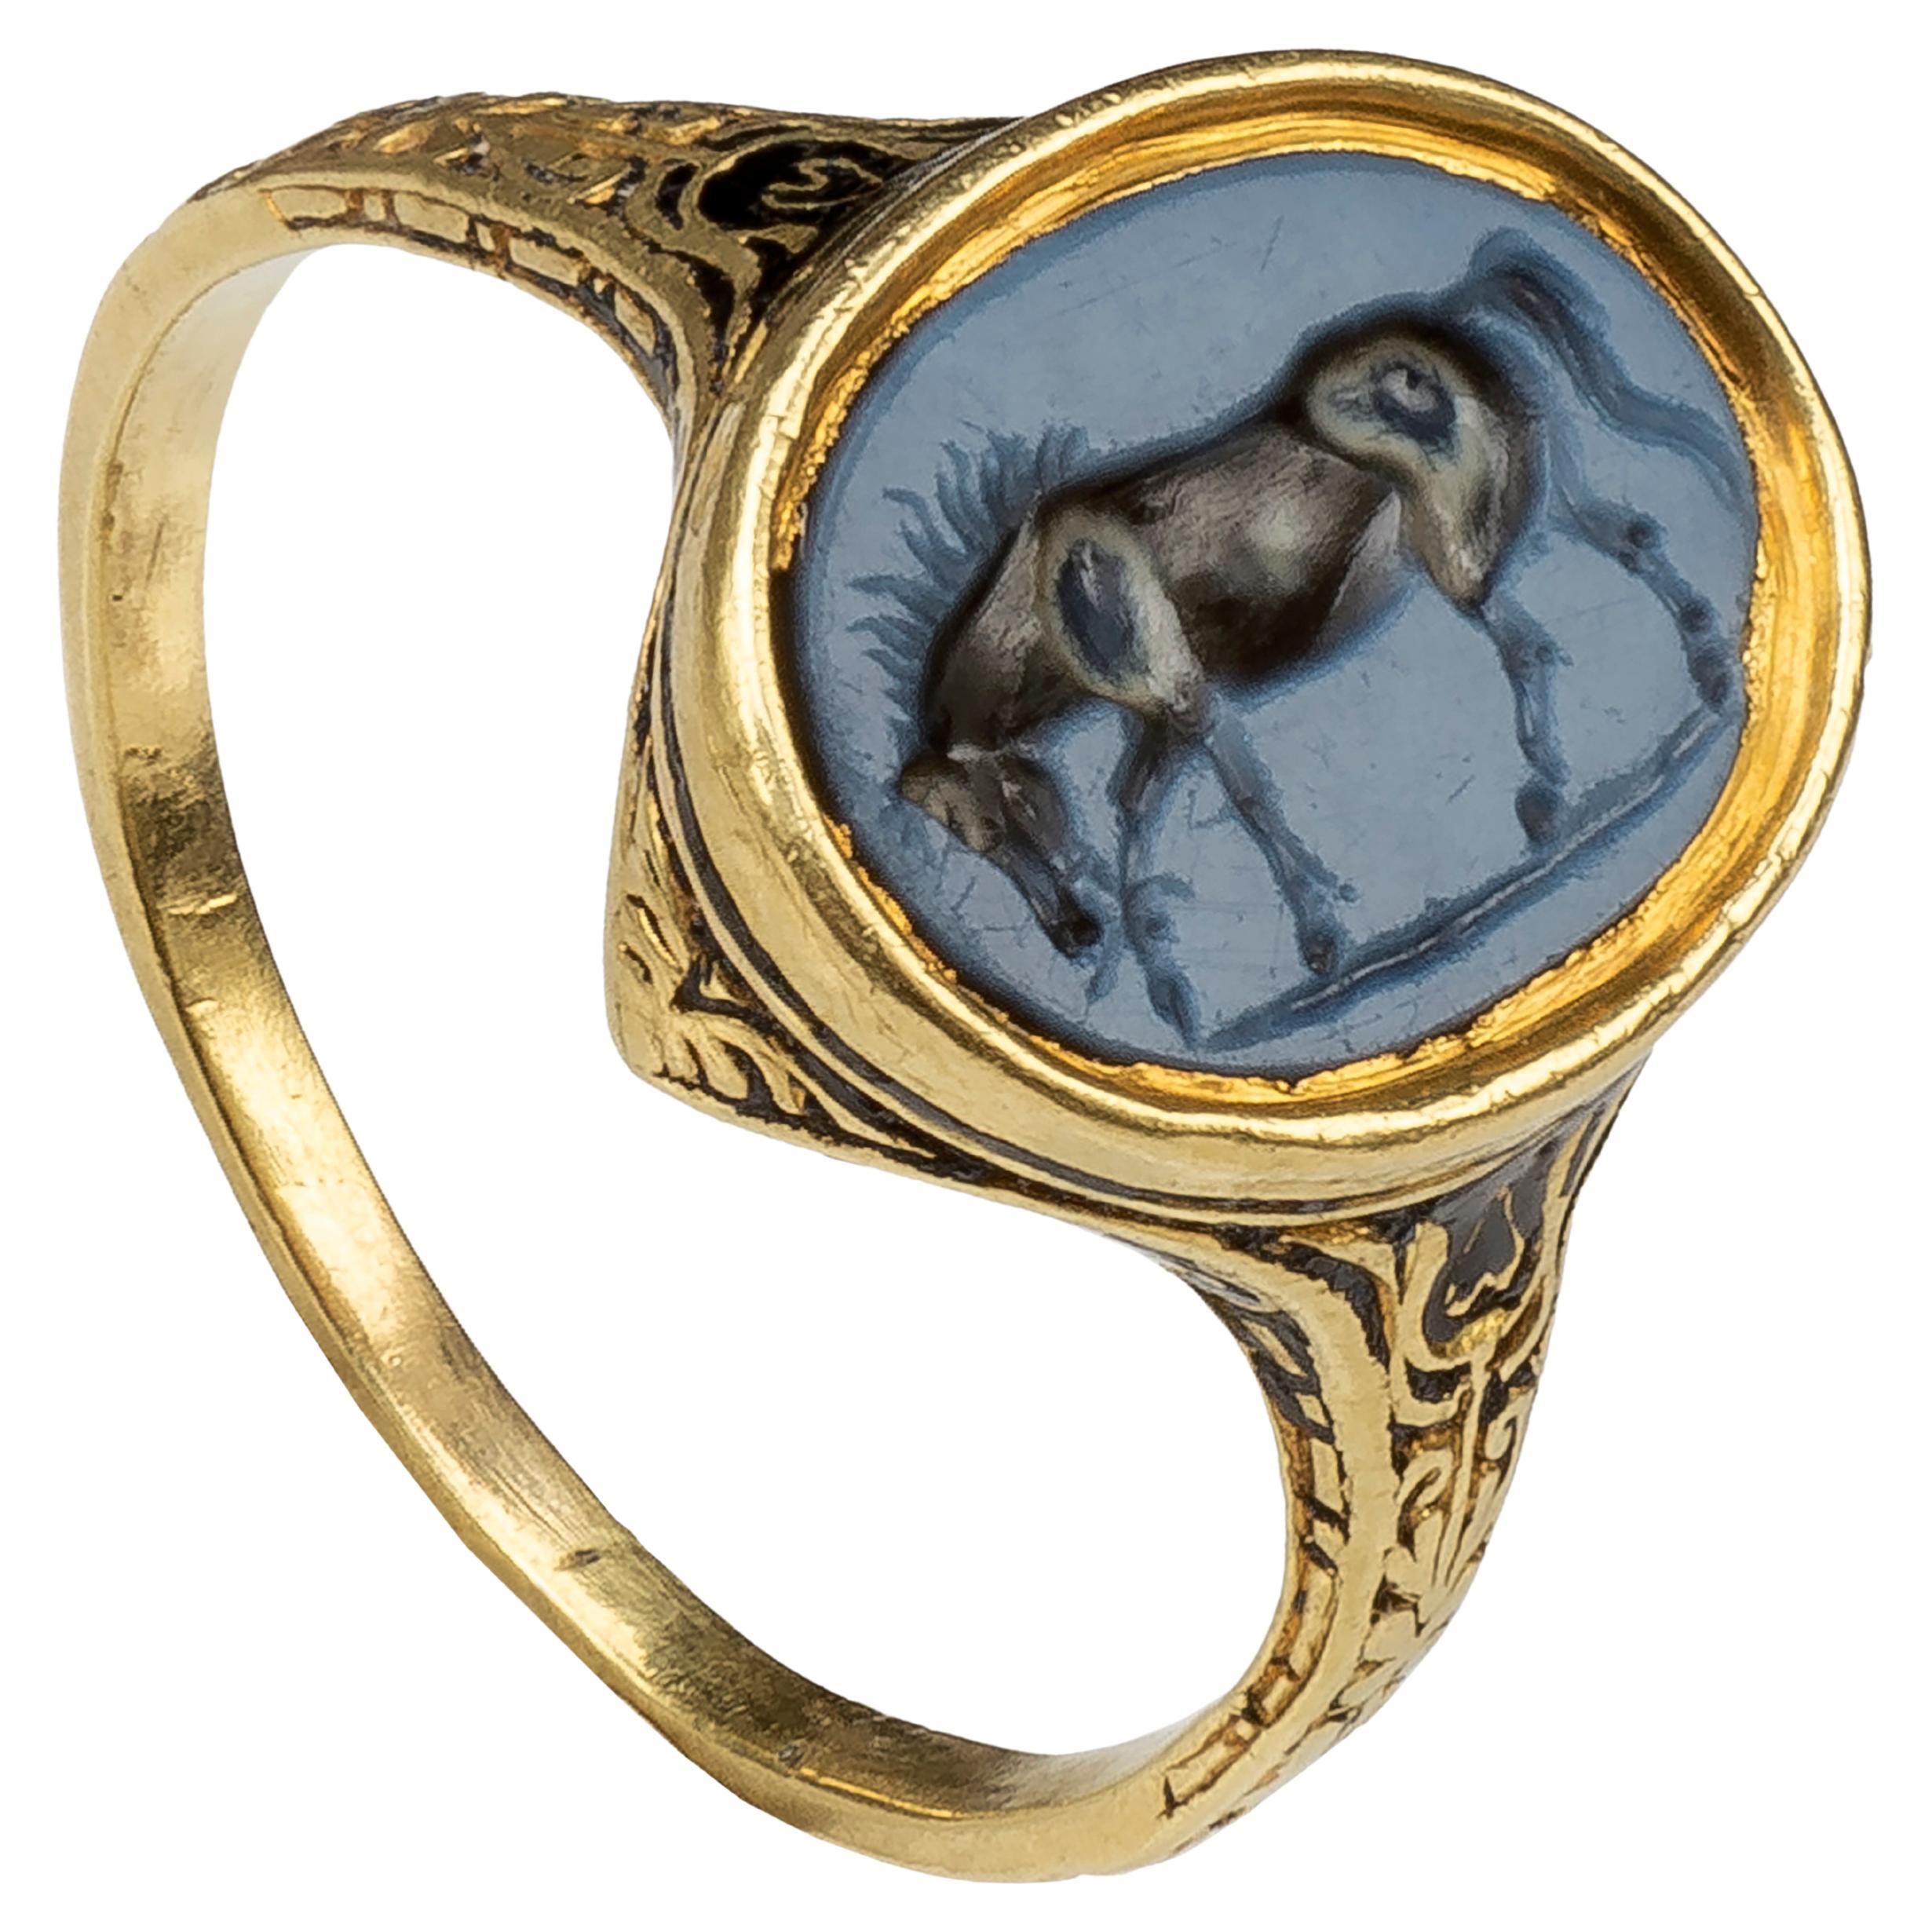 Gold Renaissance Ring with Roman Agate Intaglio Depicting a Horse